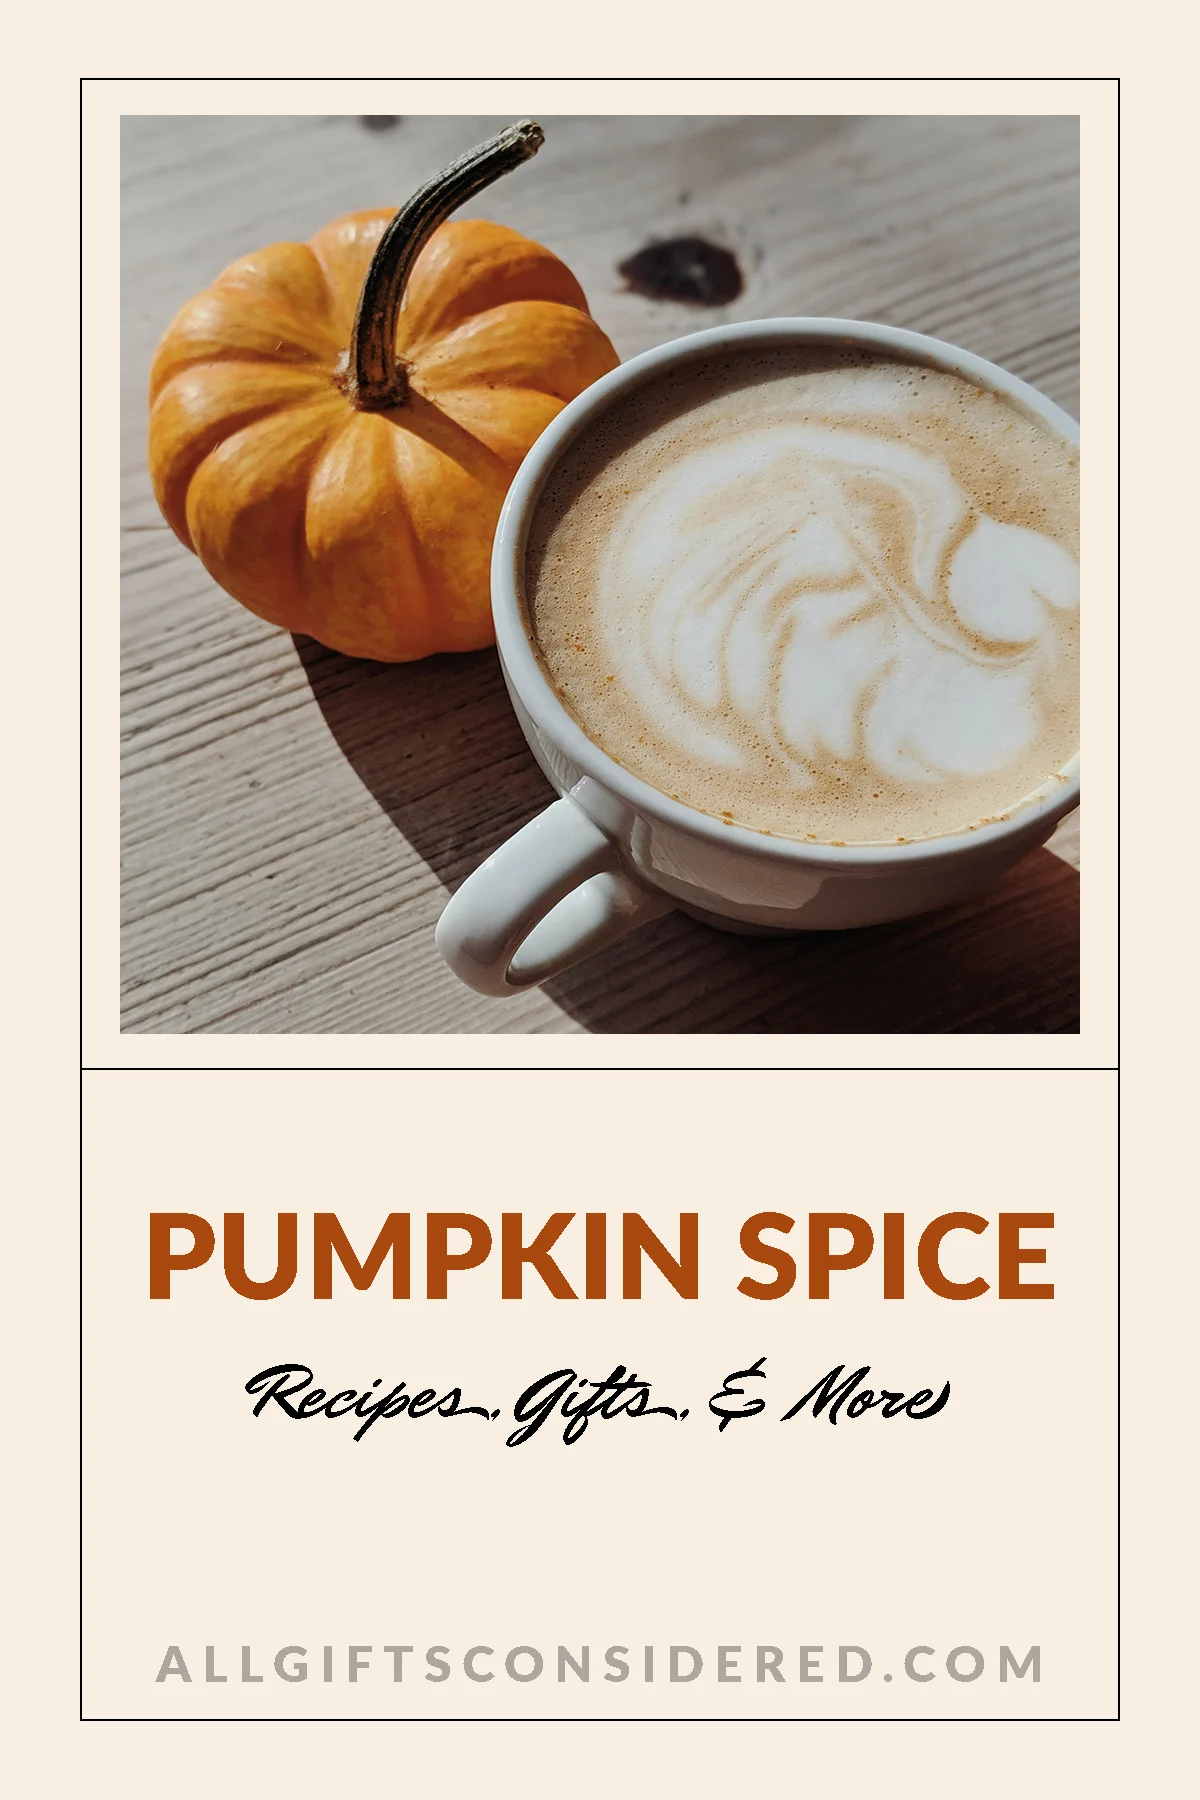 Pumpkin Spice Gifts - Feature Image